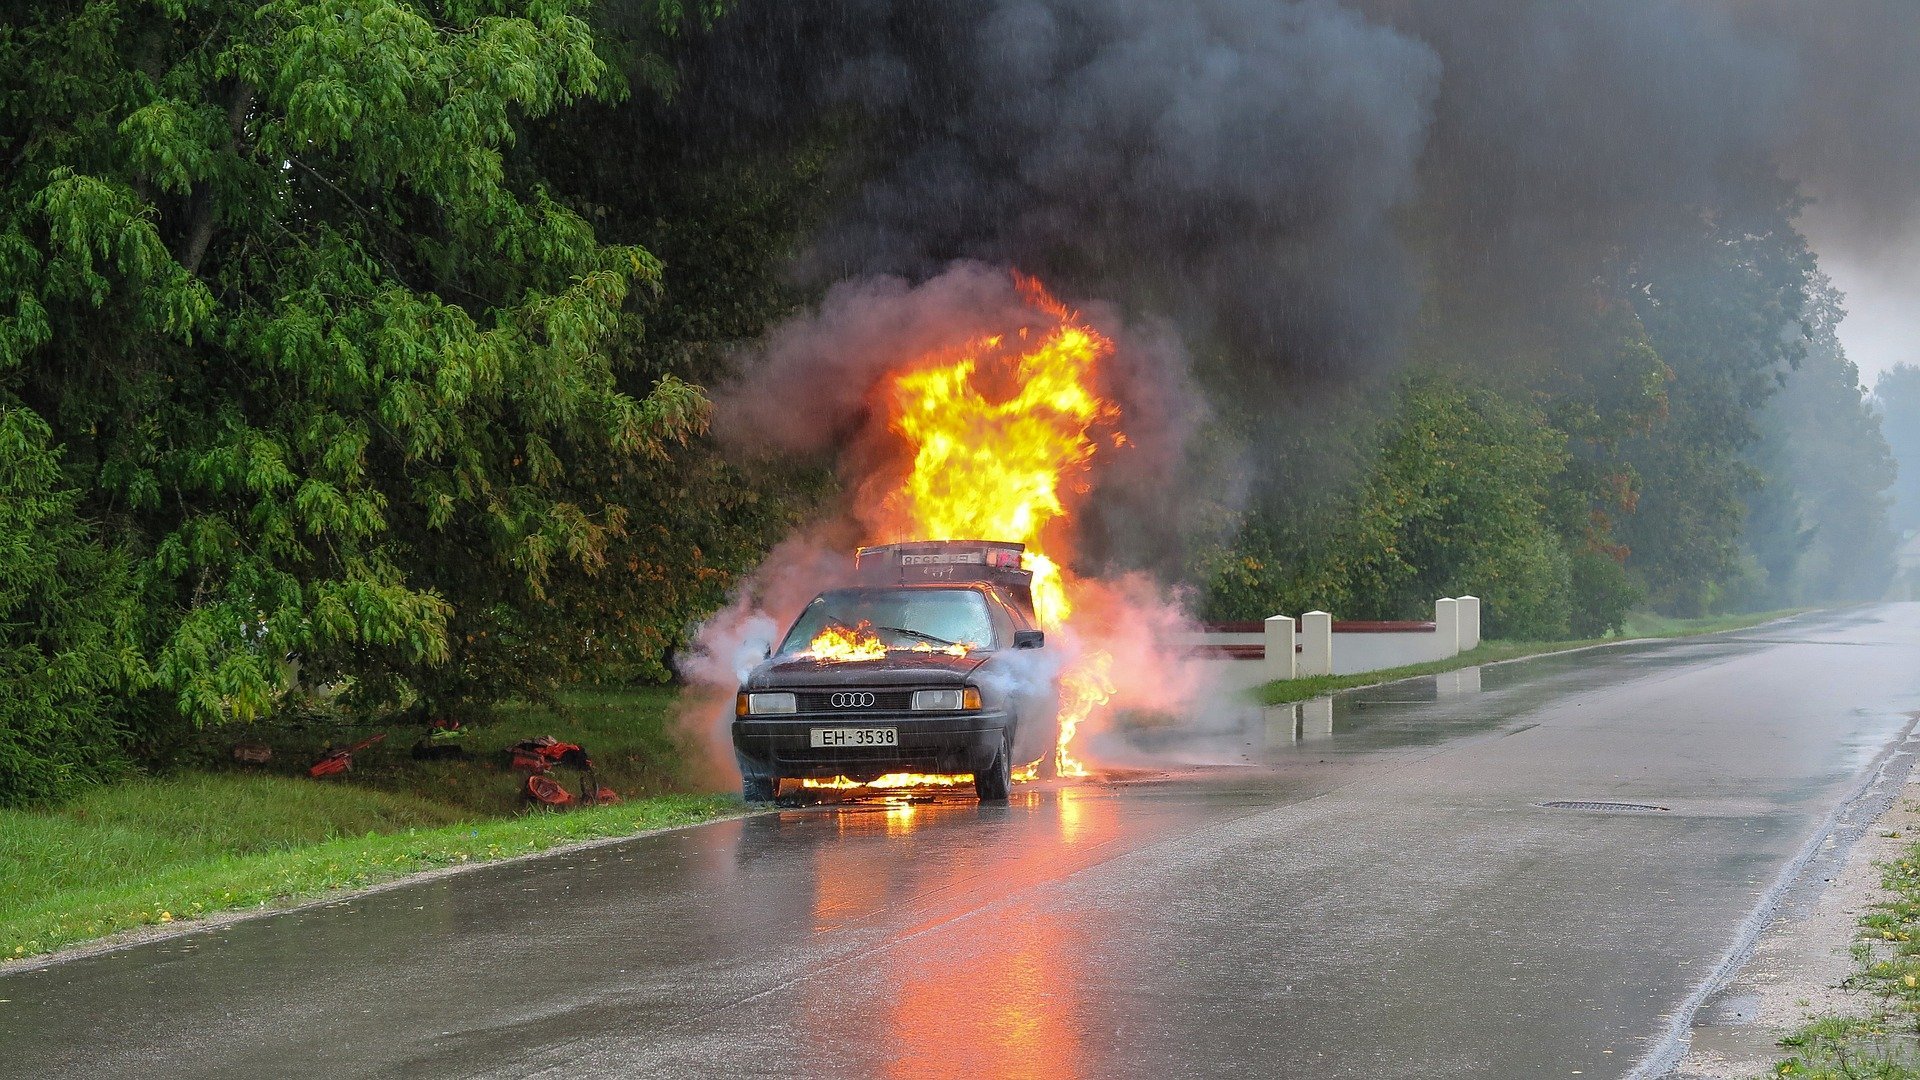 A photograph of a burning car on the side of the road | Source: Pixabay